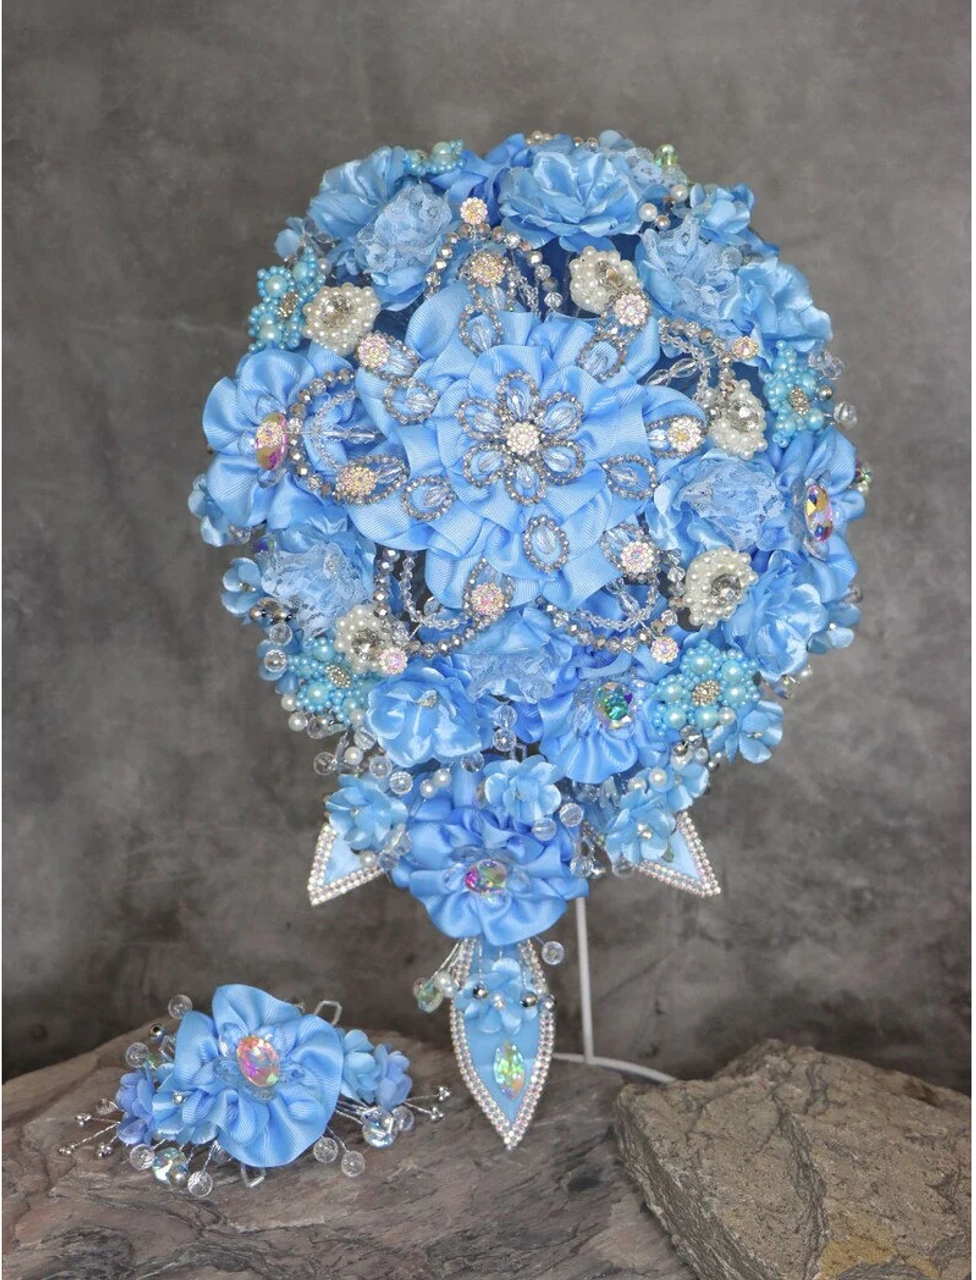 Blue Bedazzle Candy Kit – Stock 'n Save